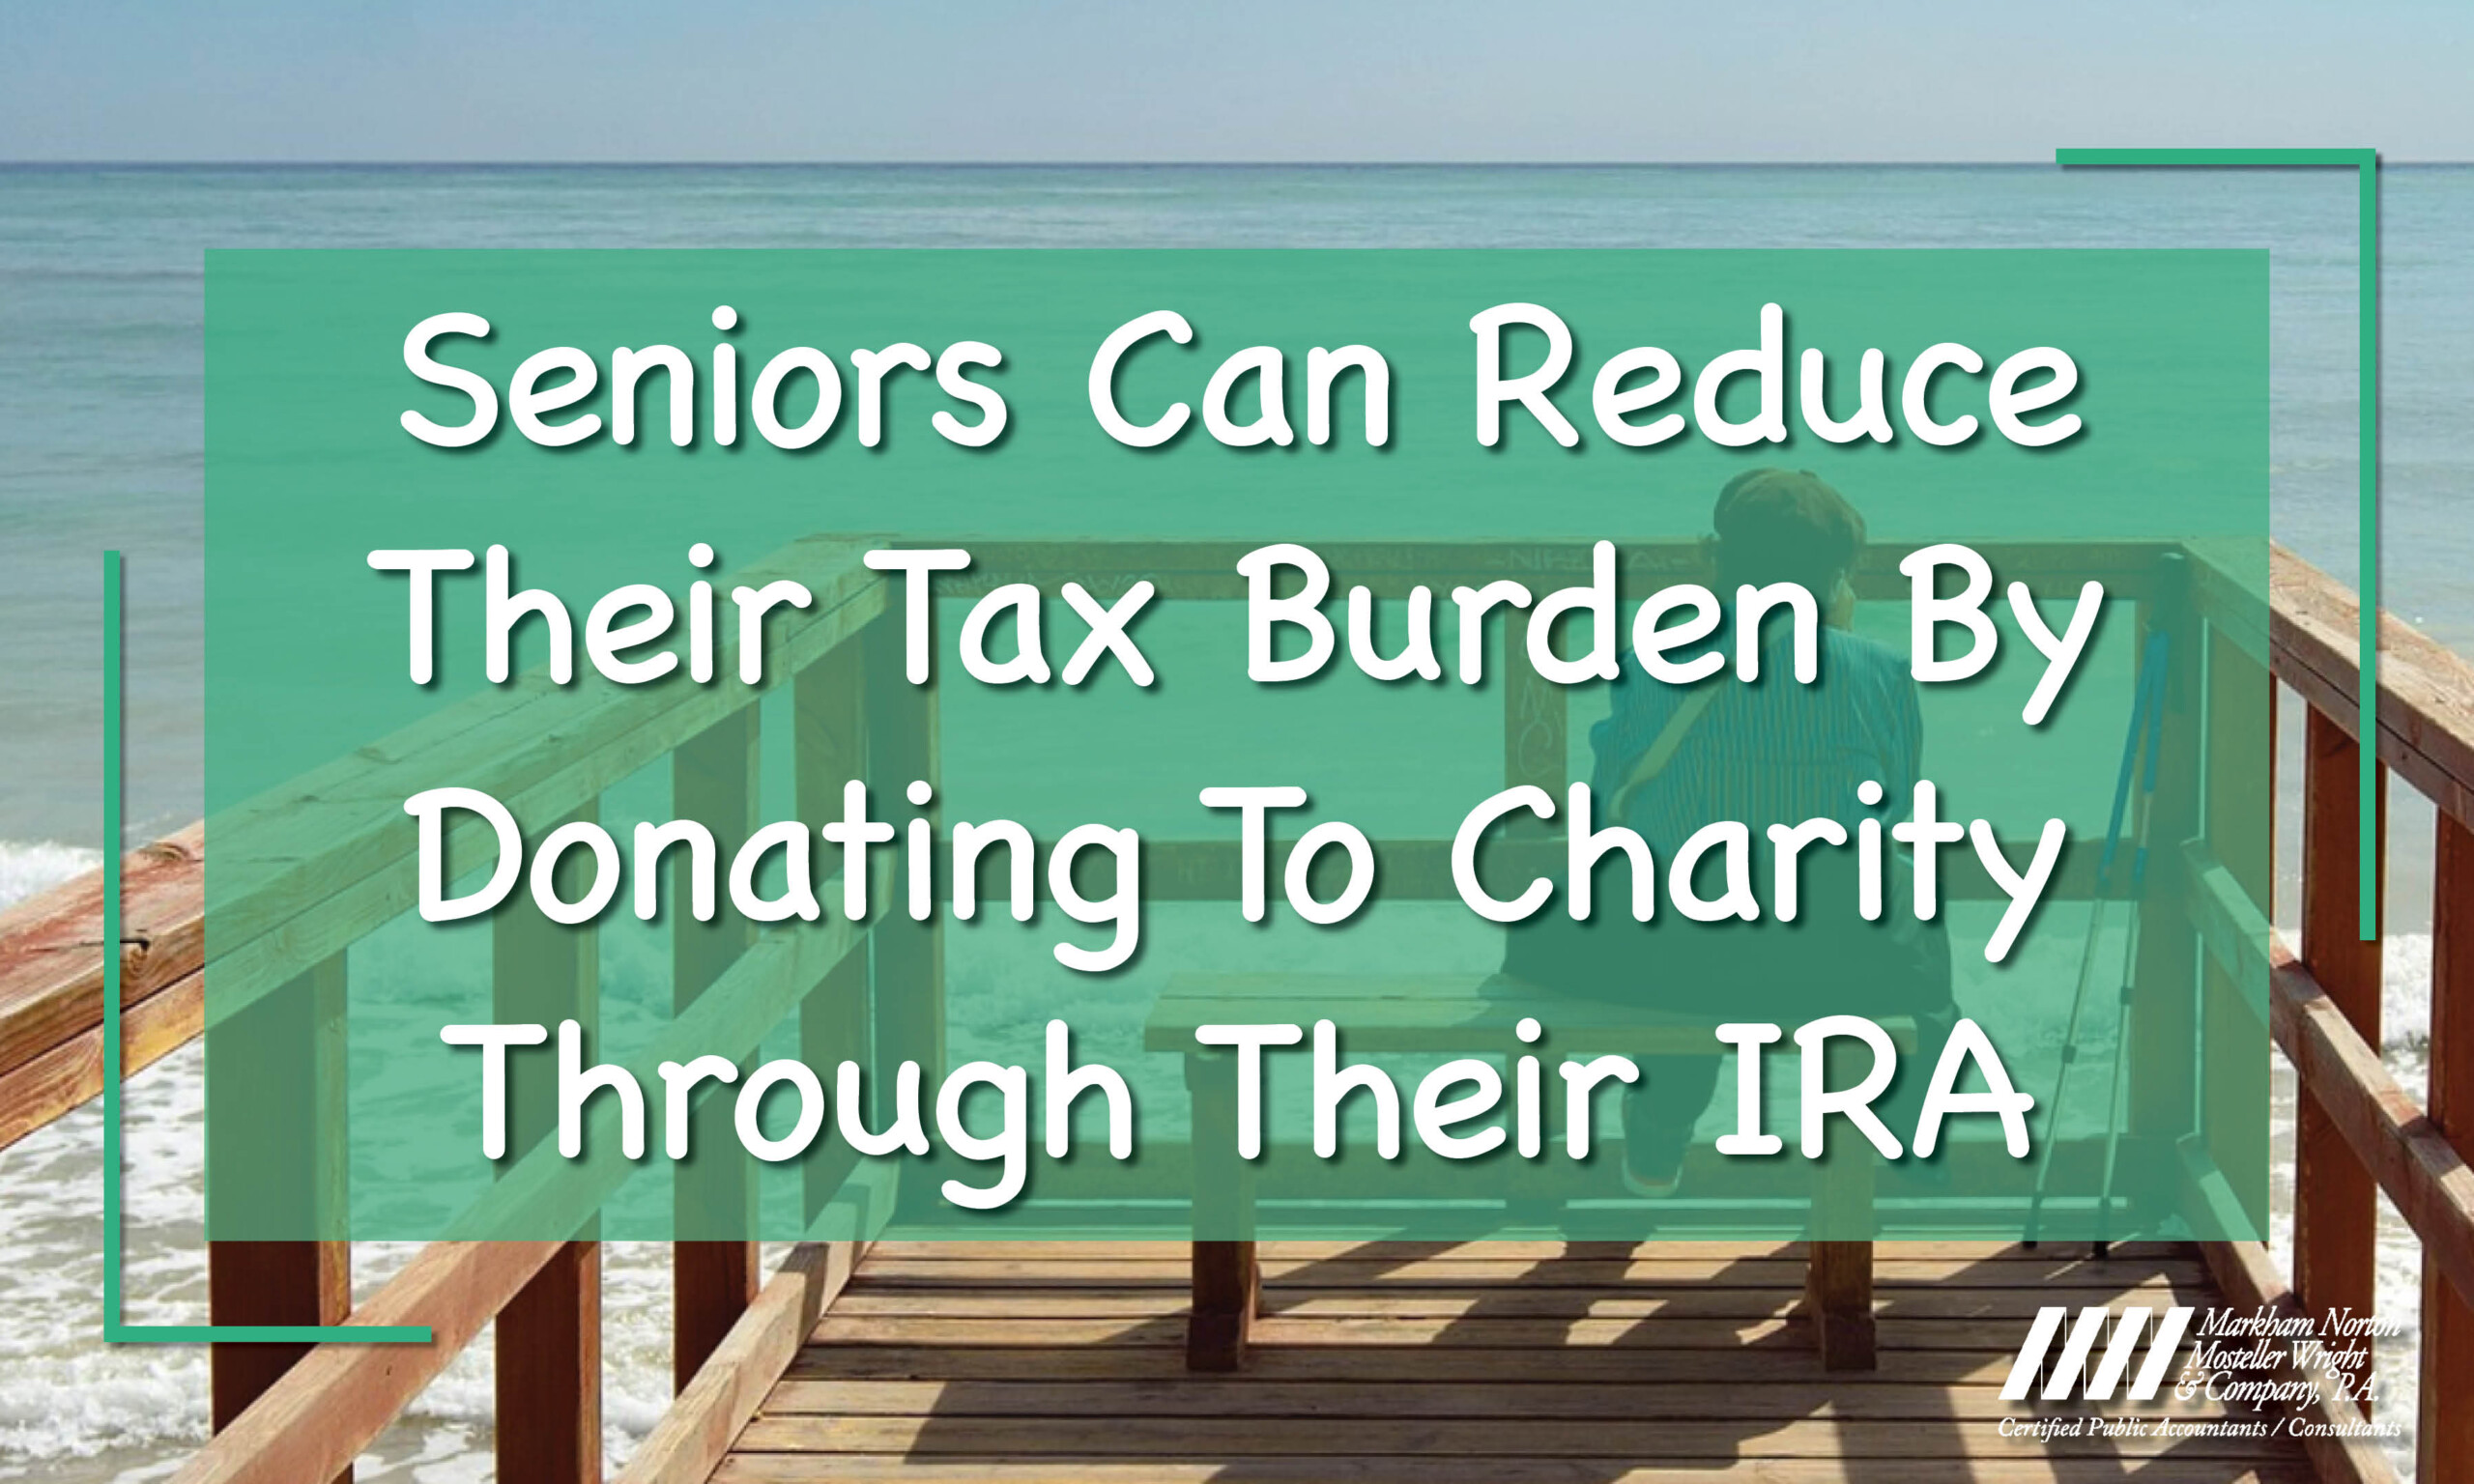 Seniors Can Reduce Their Tax Burden By Donating To Charity Through Their IRA